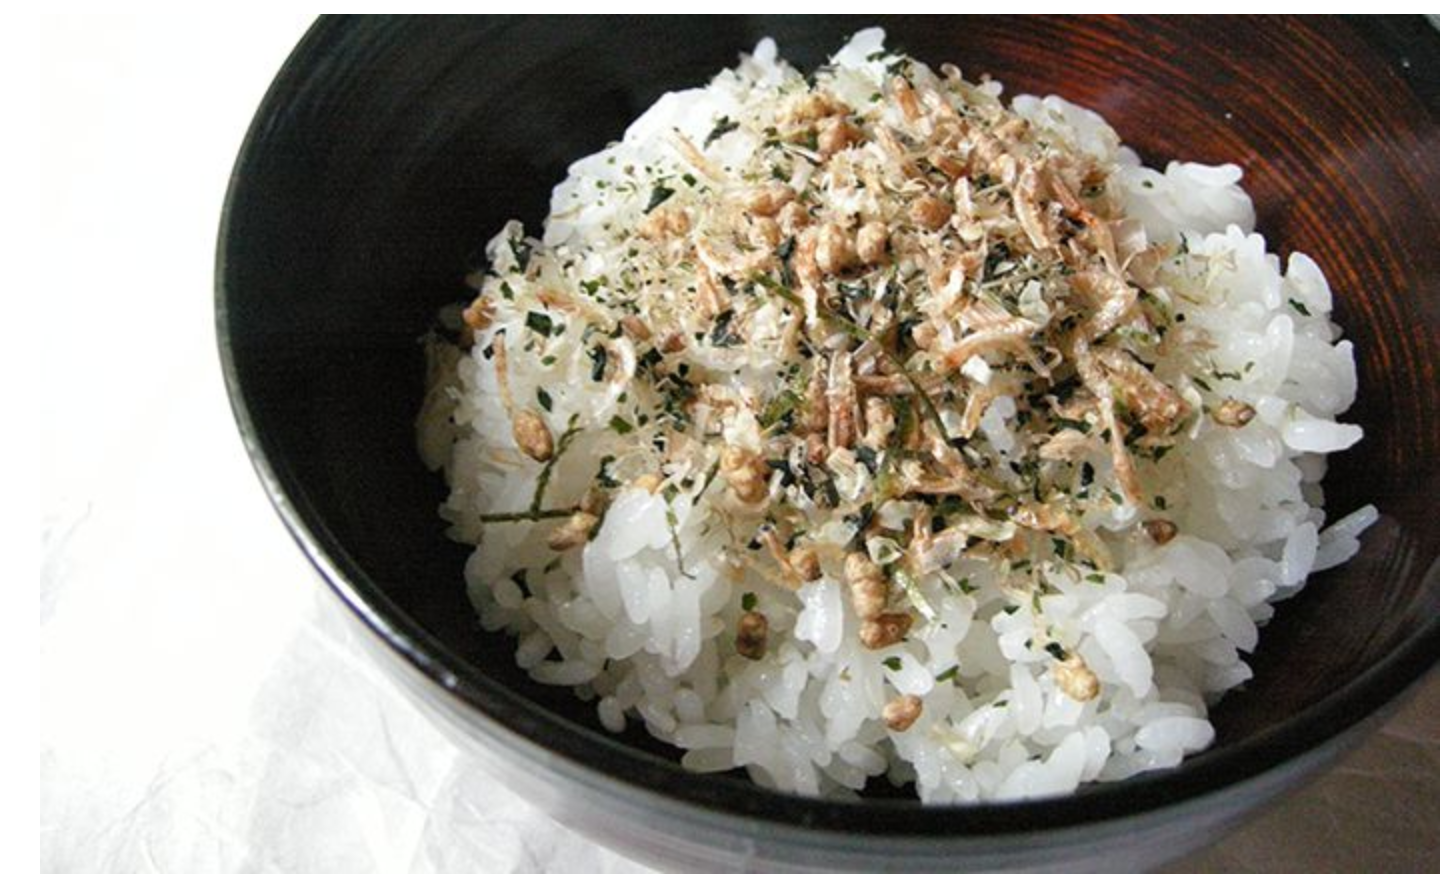 Sprinkle with bonito and roasted brown rice 20g